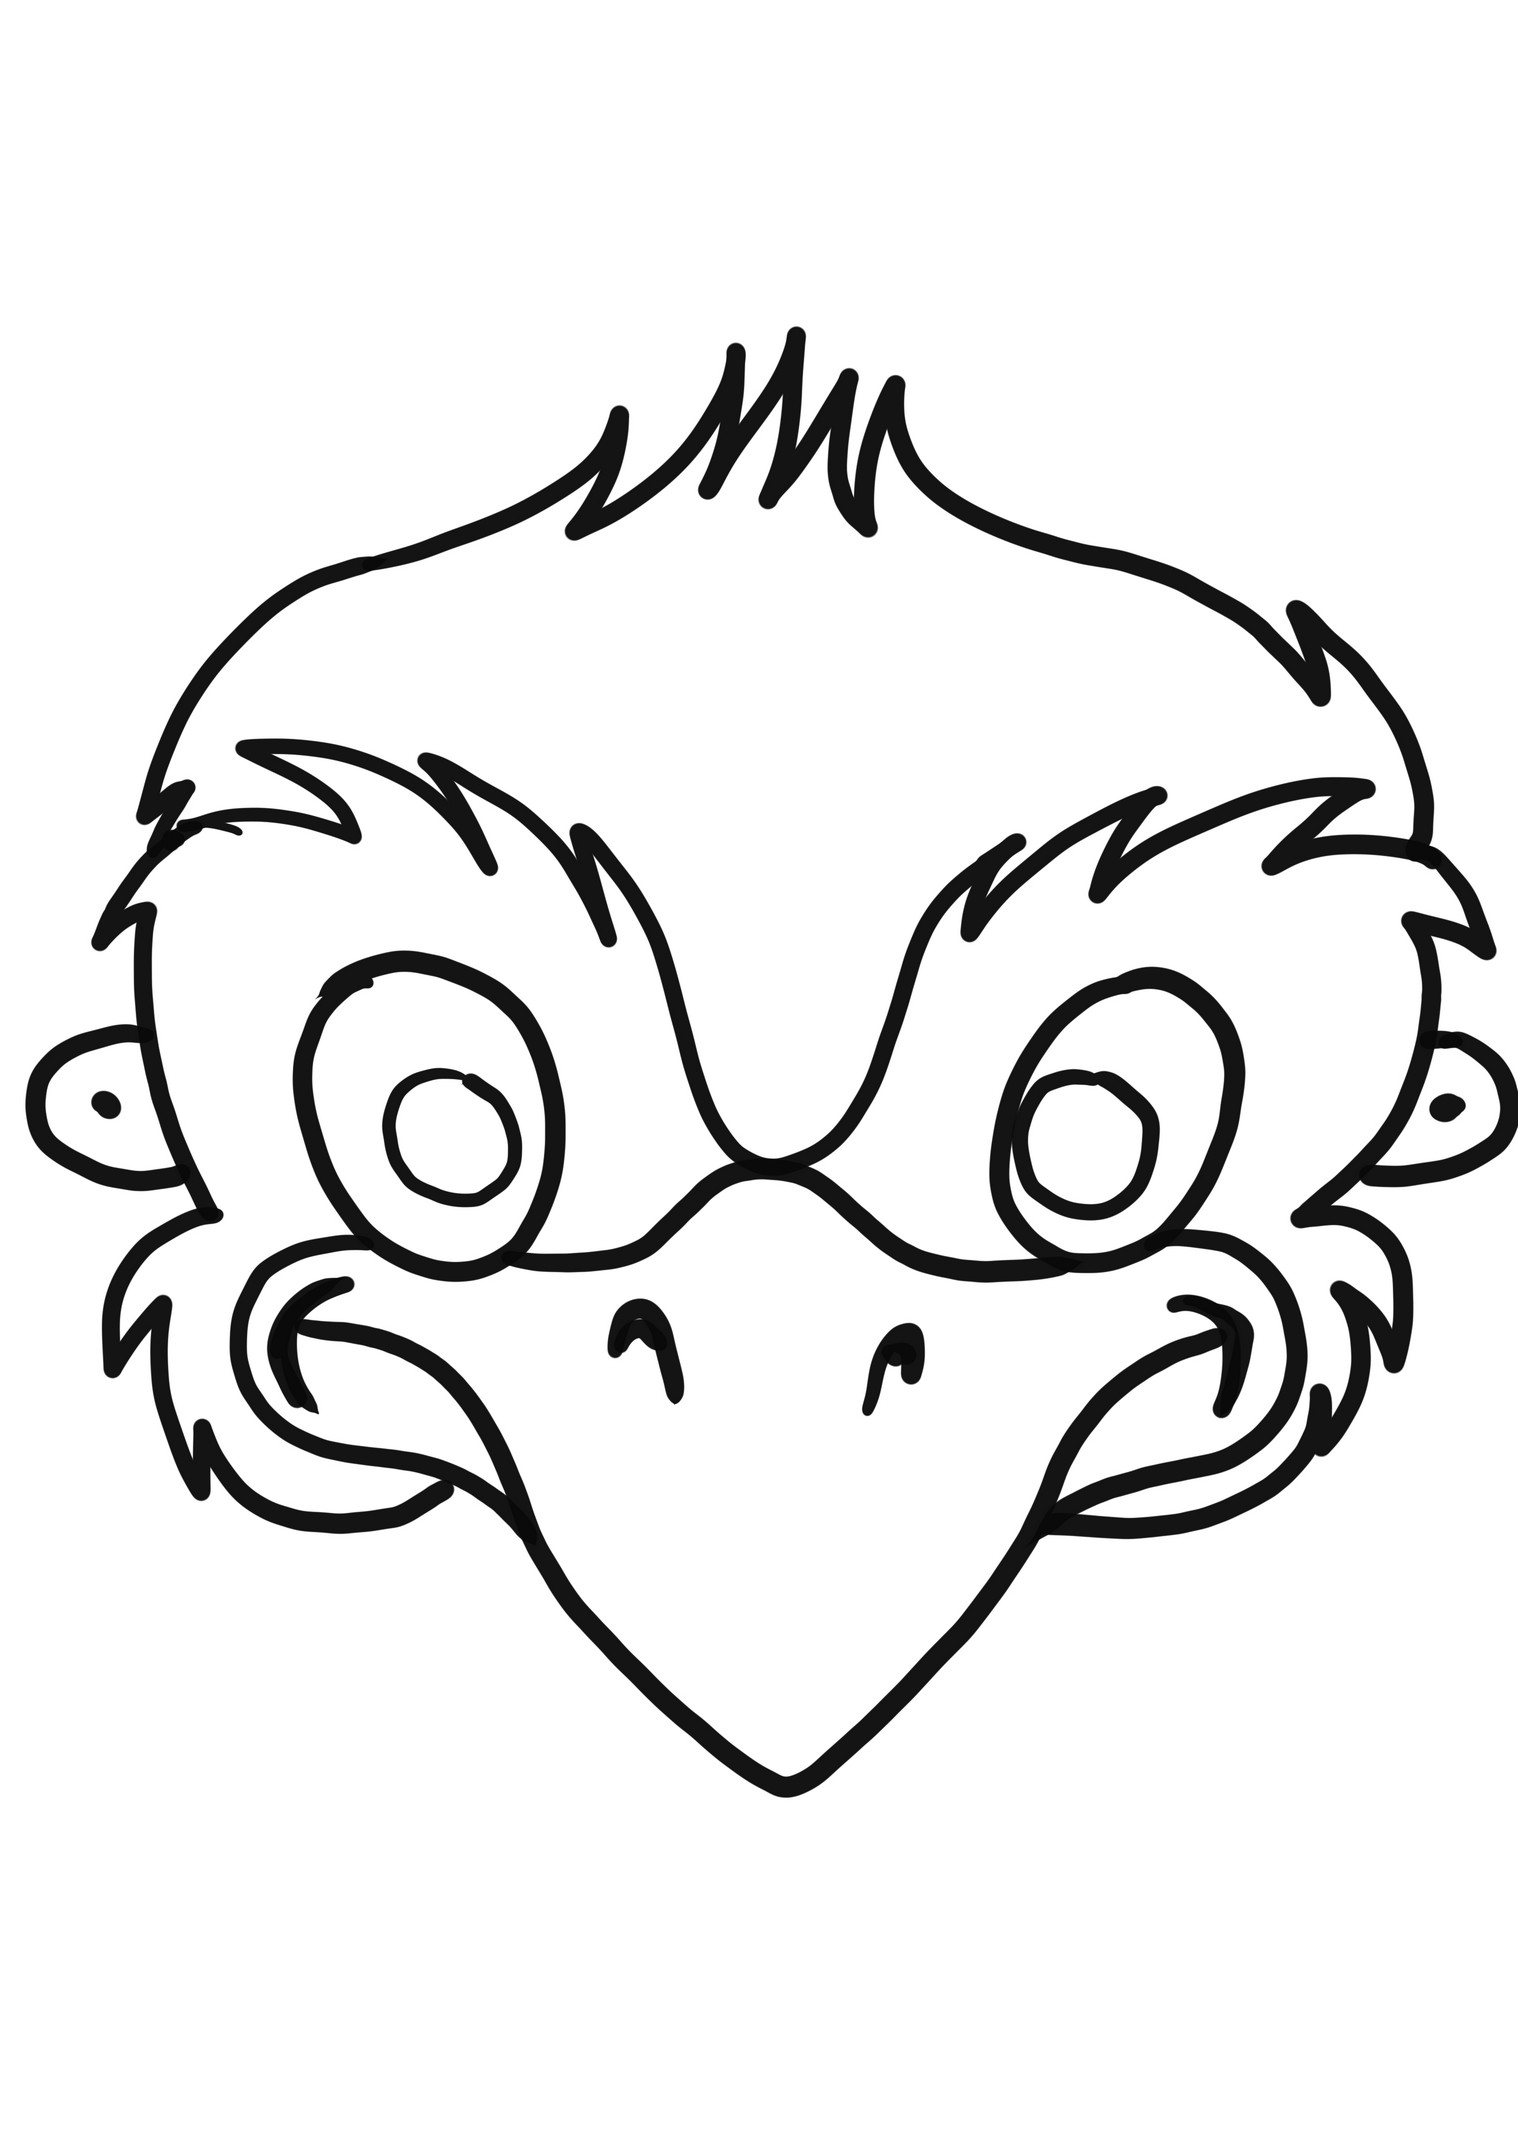 Em Mask coloring page to cut out